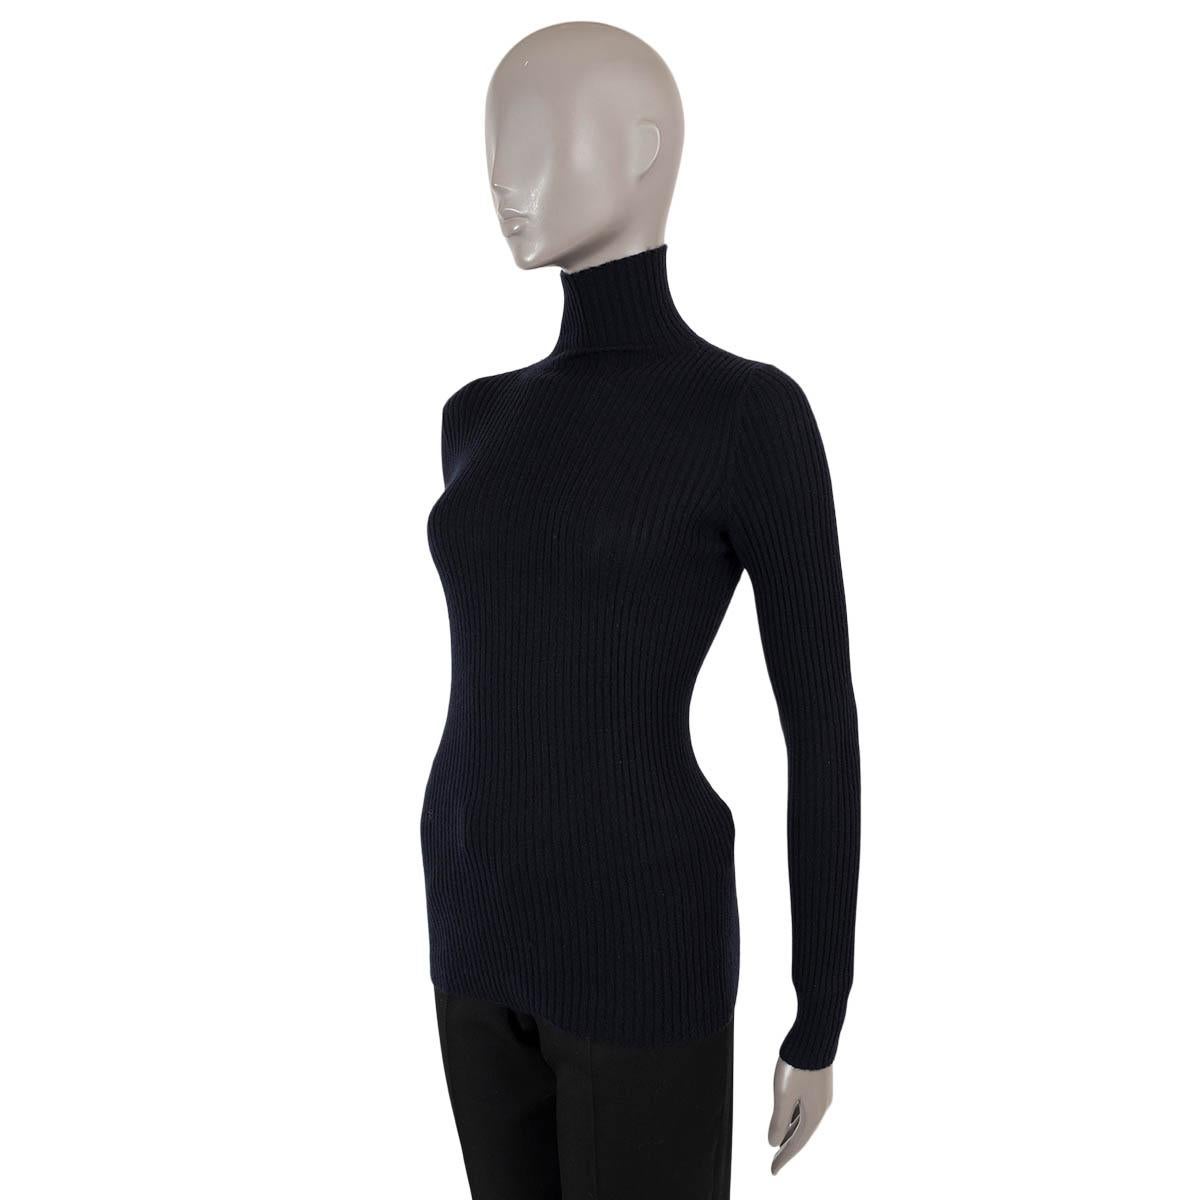 100% authentic Jil sander rib knit turtleneck sweater in navy blue cashmere -please note content tag is missing. Unlined. Has been worn and is in excellent condition.

Measurements
Tag Size	42
Size	XL
Shoulder Width	31cm (12.1in)
Bust From	82cm